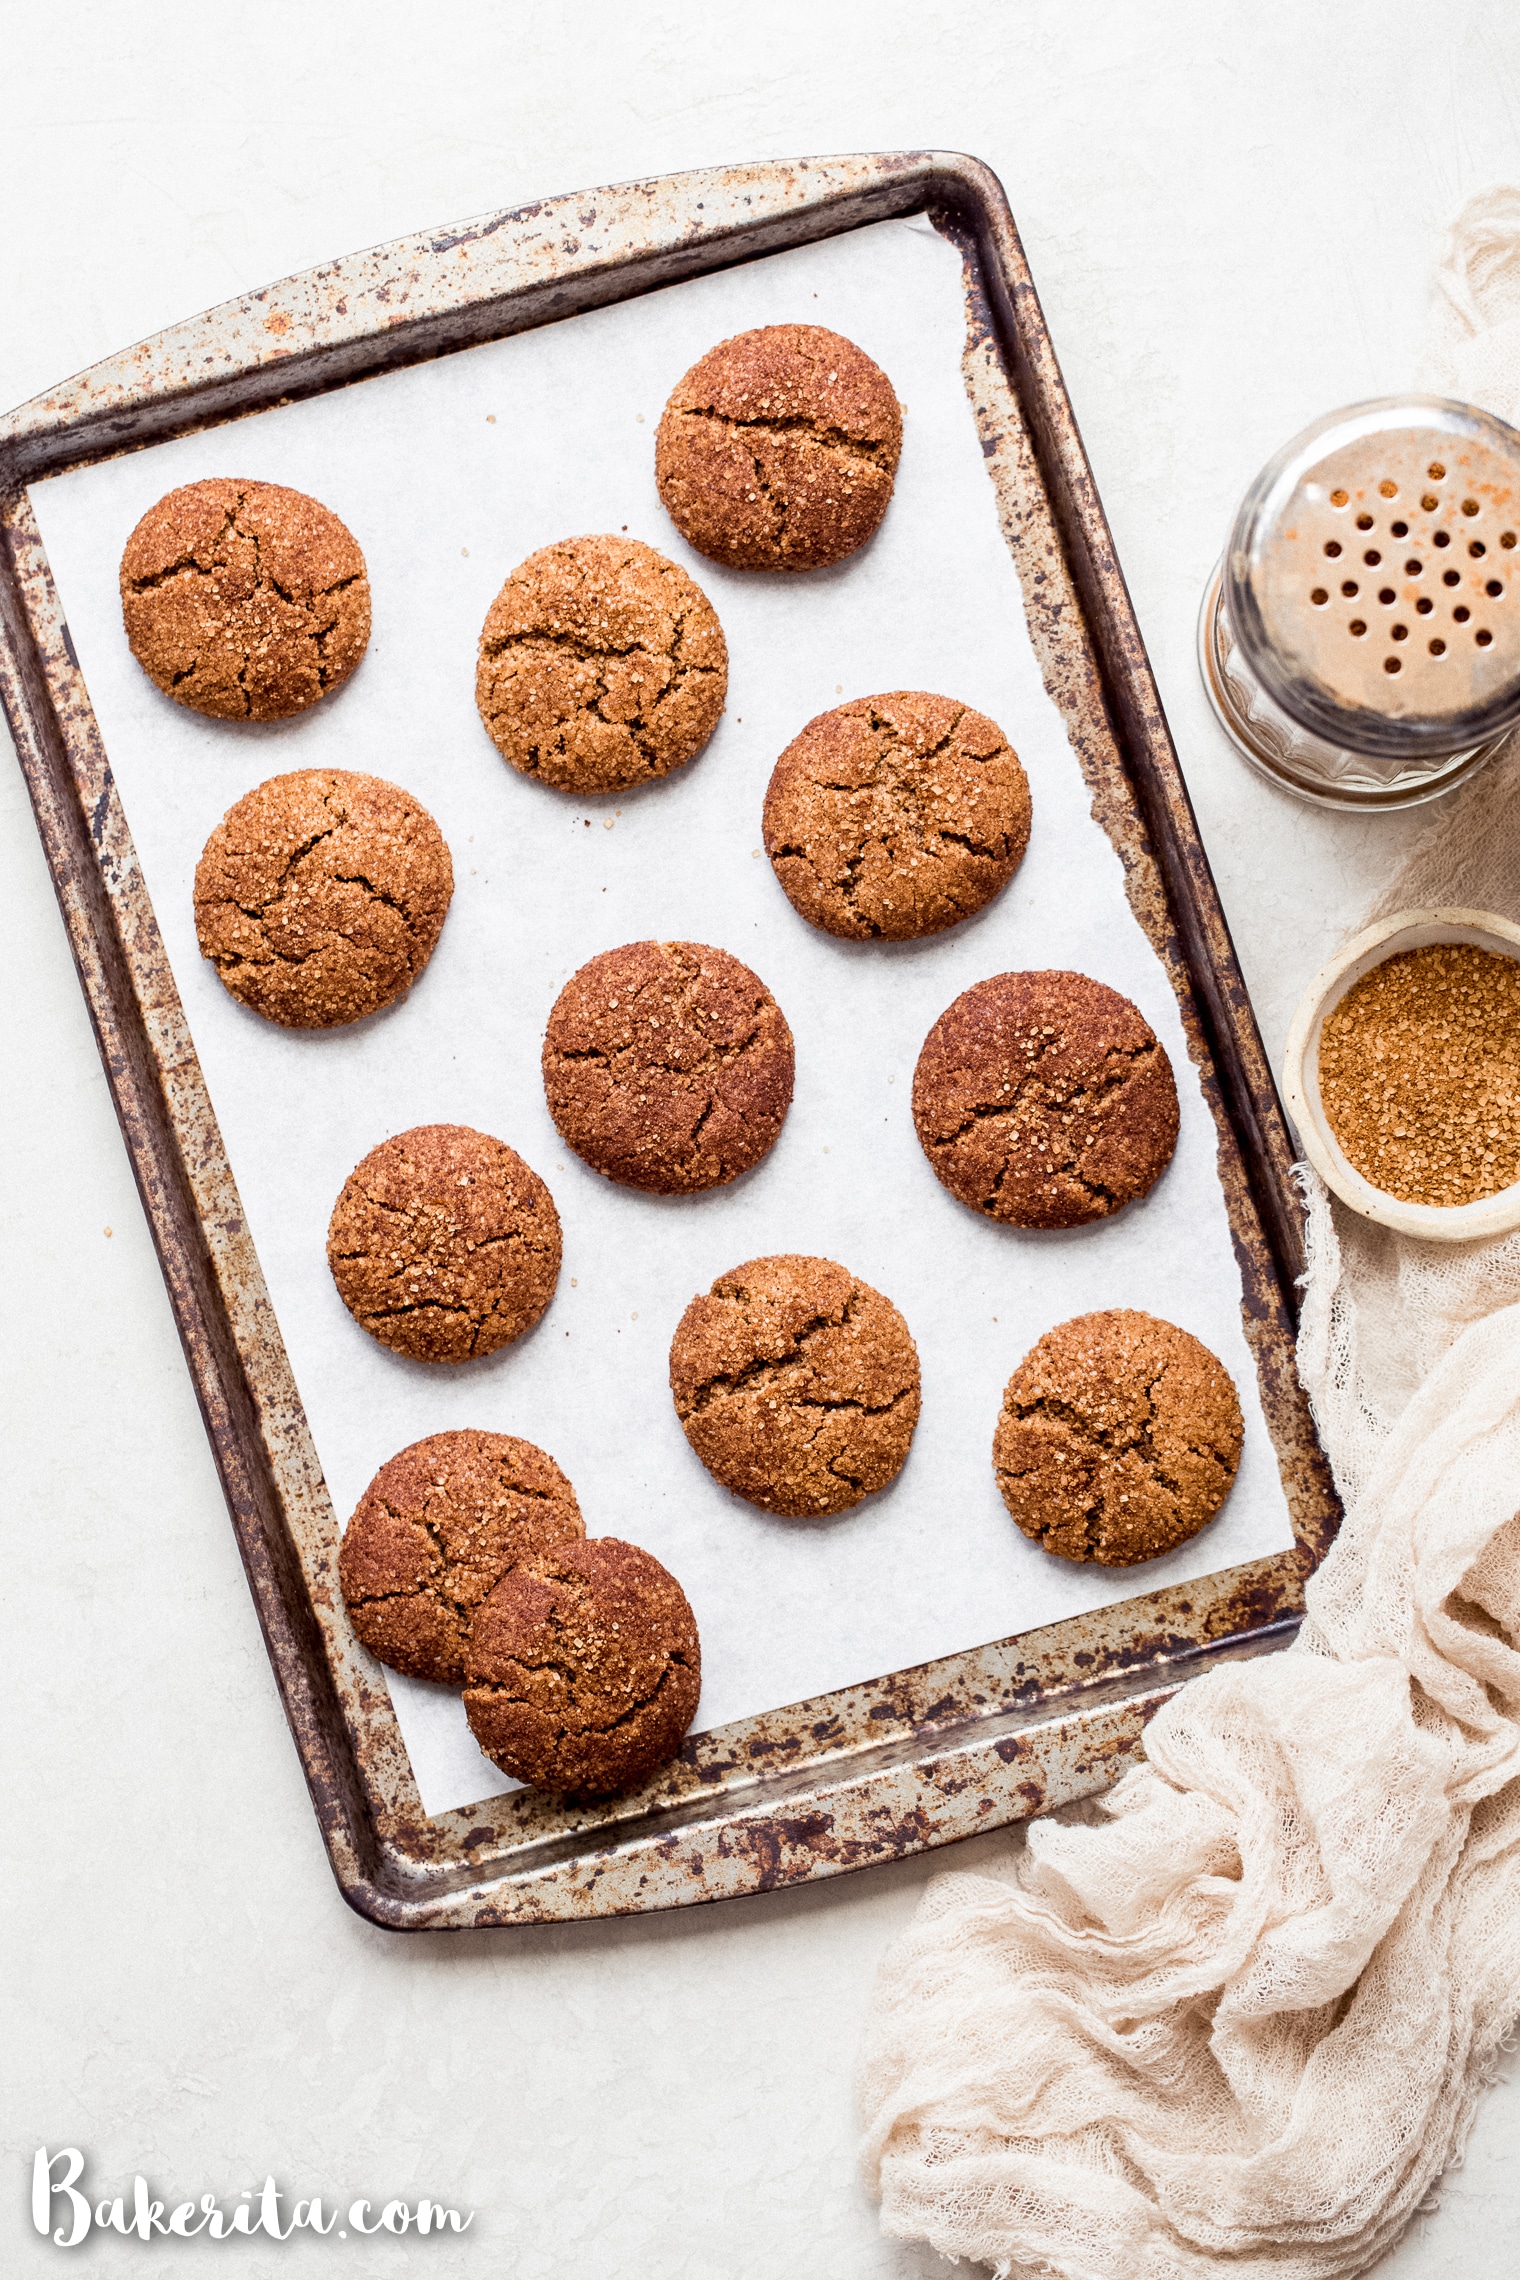 These Paleo & Vegan Snickerdoodles are some of the chewiest, softest cookies ever, with tons of cinnamon and a delectably crunchy cinnamon sugar coating. You'll be making them again and again!